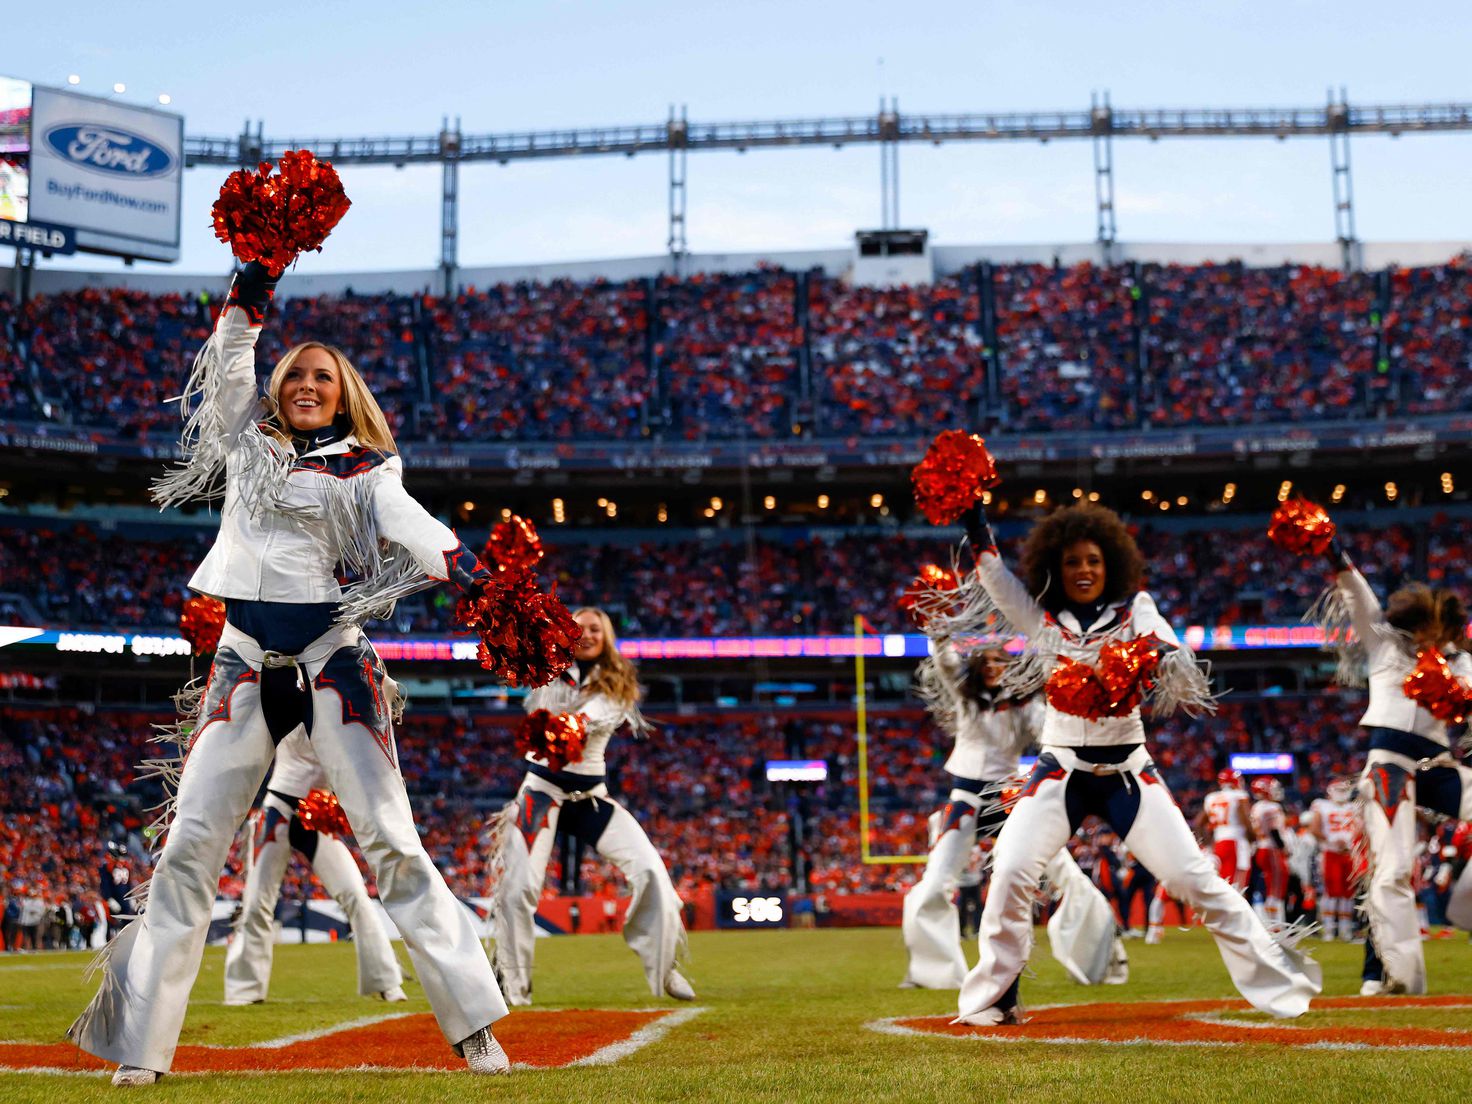 What are the rules for NFL cheerleaders? Dating NFL players, tattoos,  social media - AS USA